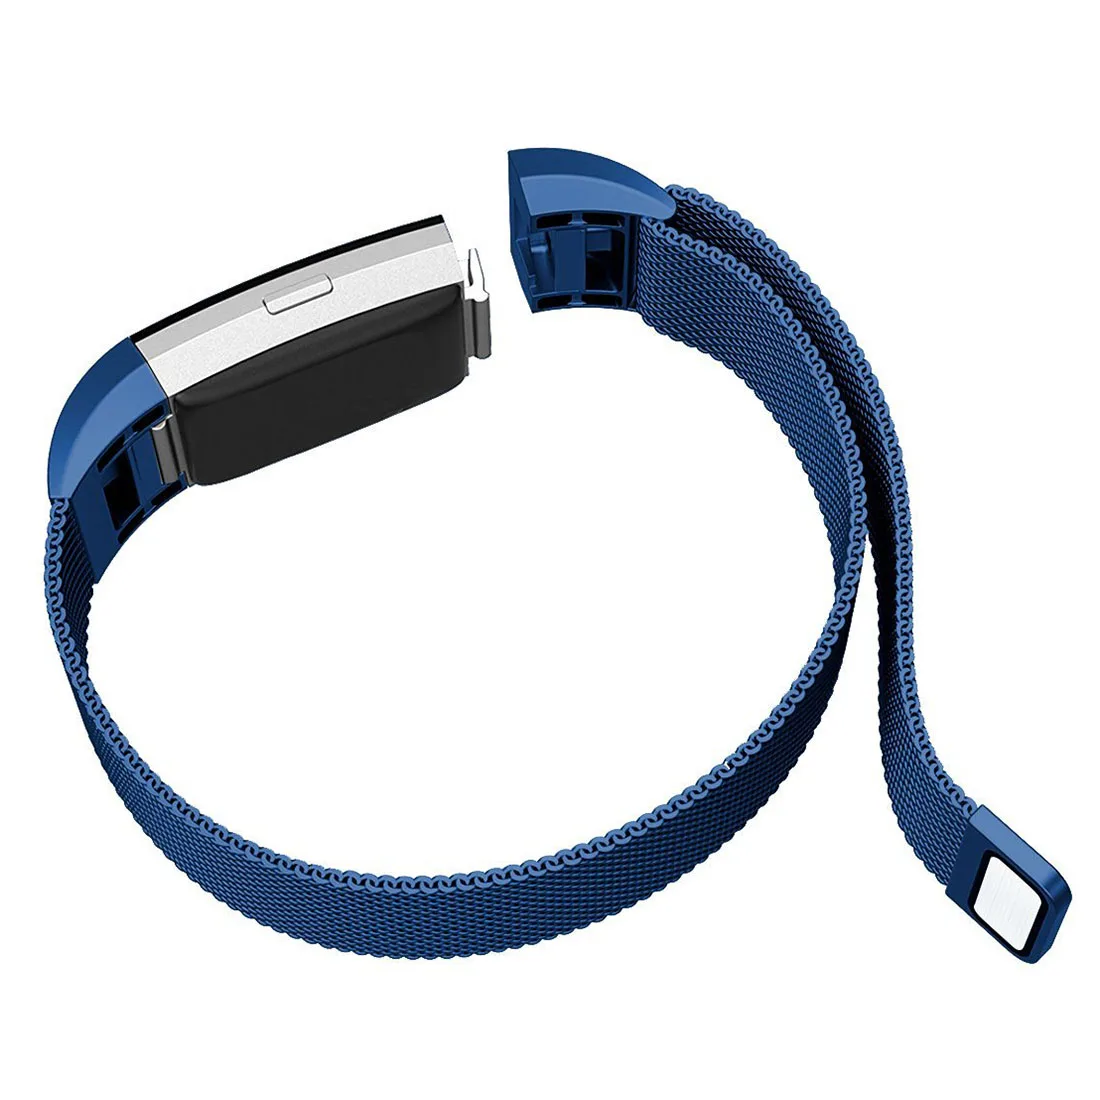 

Stainless Steel Bands Milanese Loop Replacement Accessories Bracelet Strap with Unique Magnet Lock For Fitbit Charge 2 Blue La